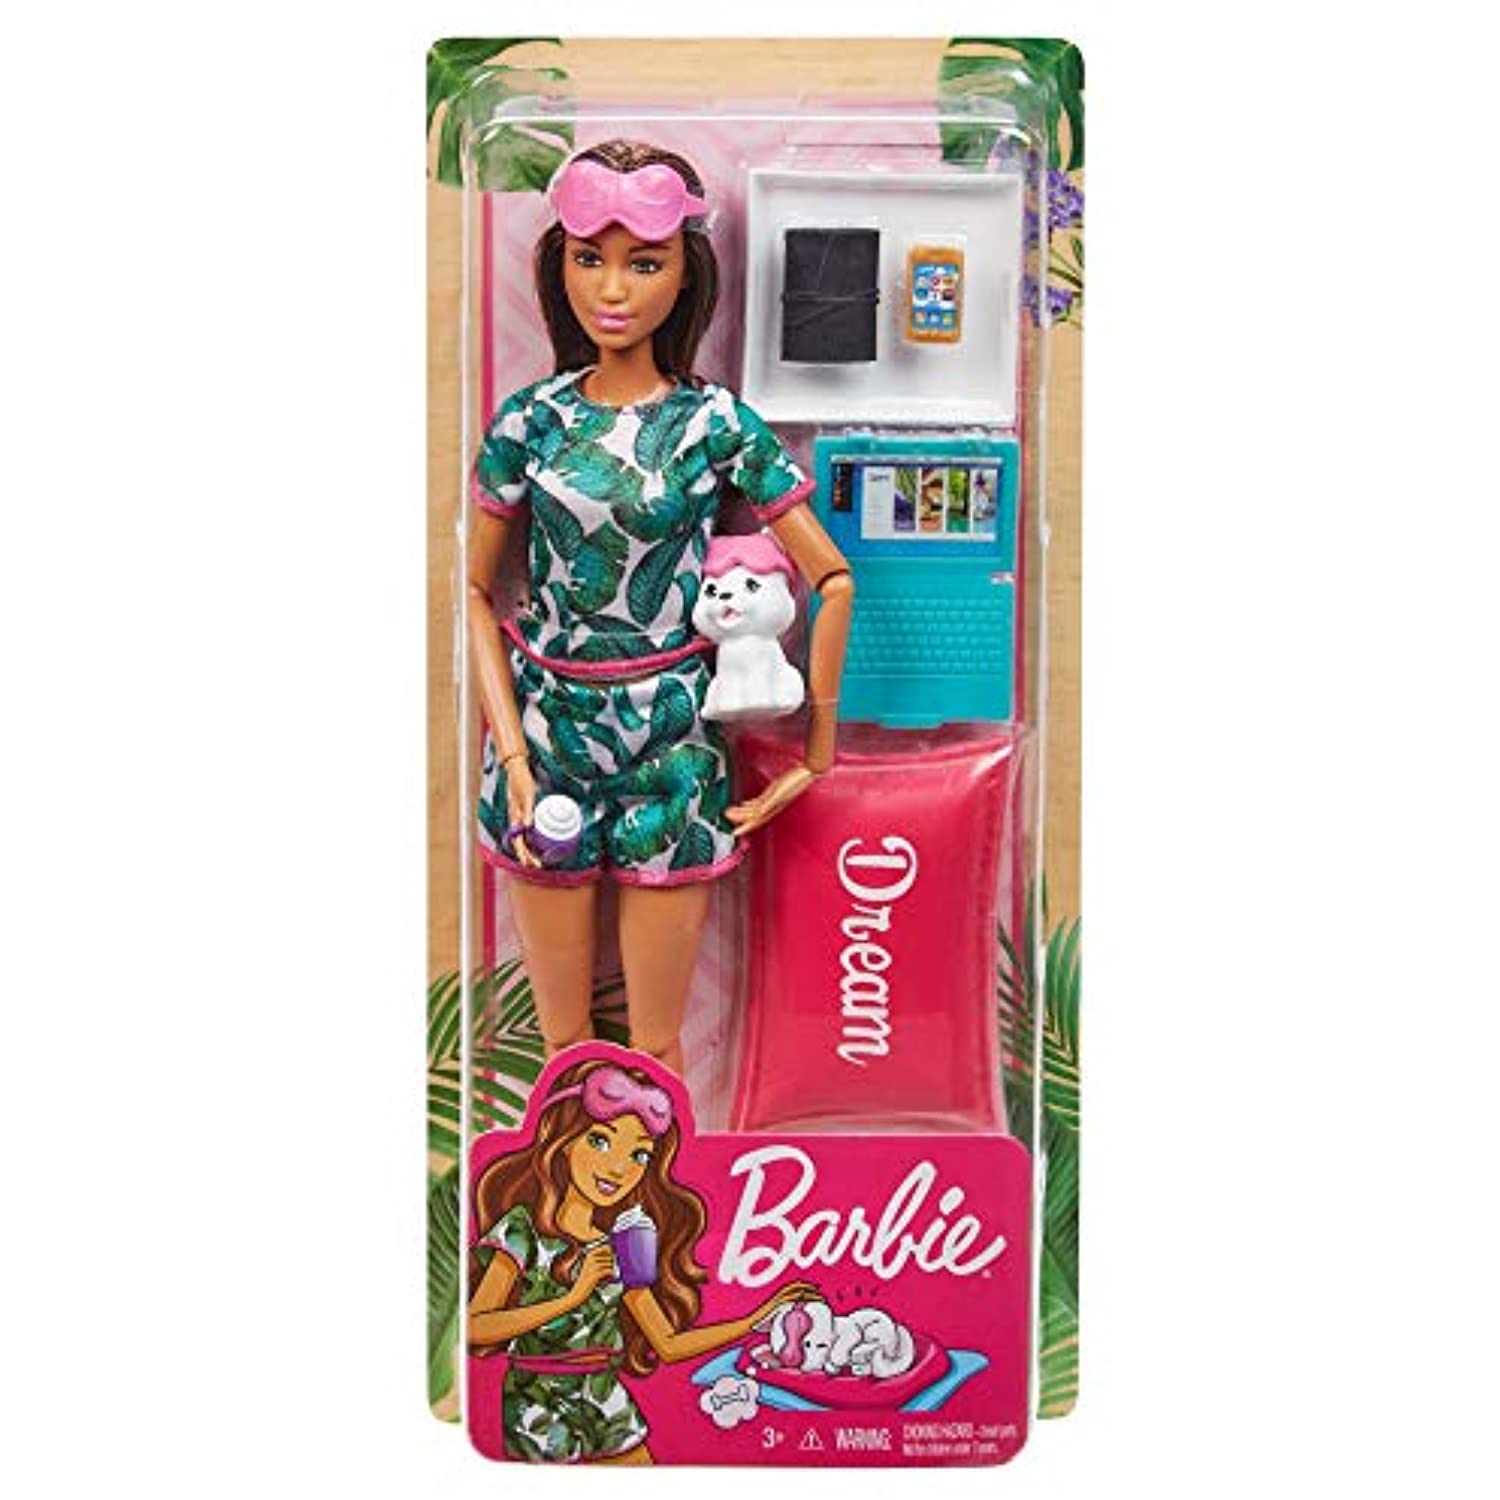 Barbie Relaxation Doll, Brunette, with Puppy and 8 Accessories, Including Pillow, Journal and Sleep Masks, Gift for Kids 3 to 7 Years Old